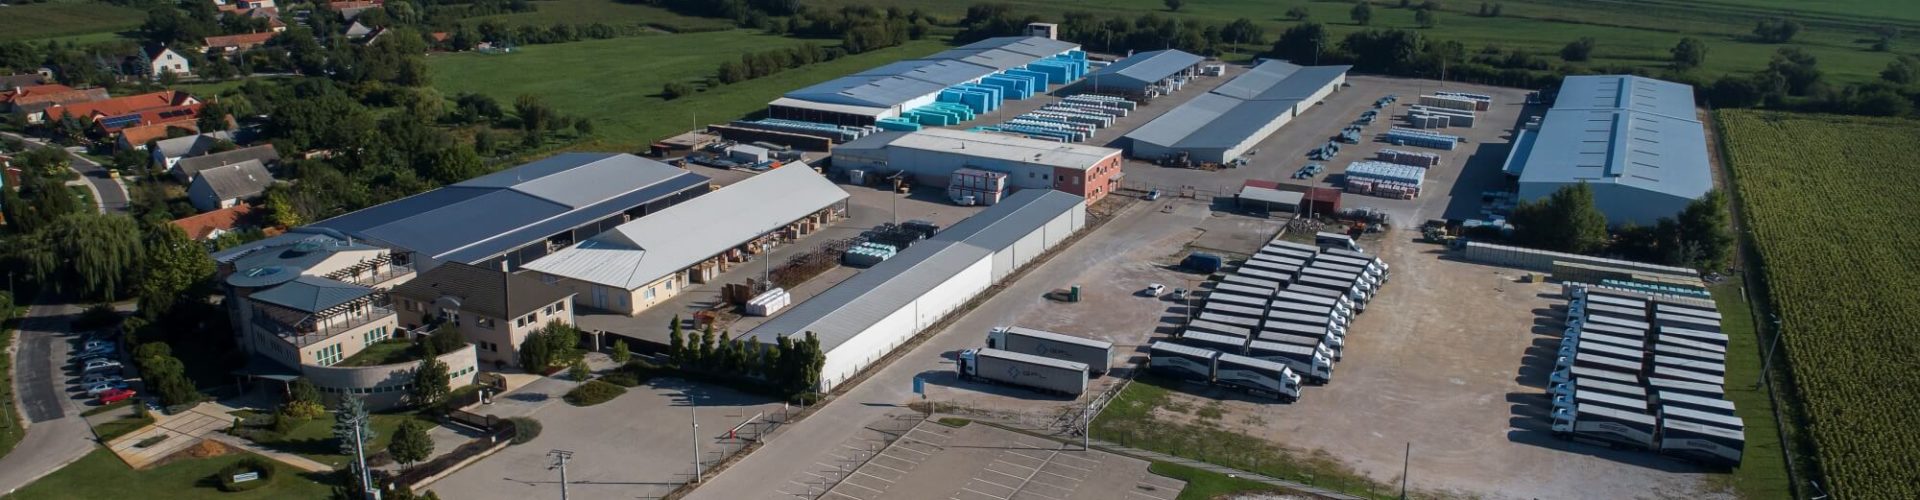 Masterplast enlarges nonwoven capacity with new Spunbond plant in Hungary